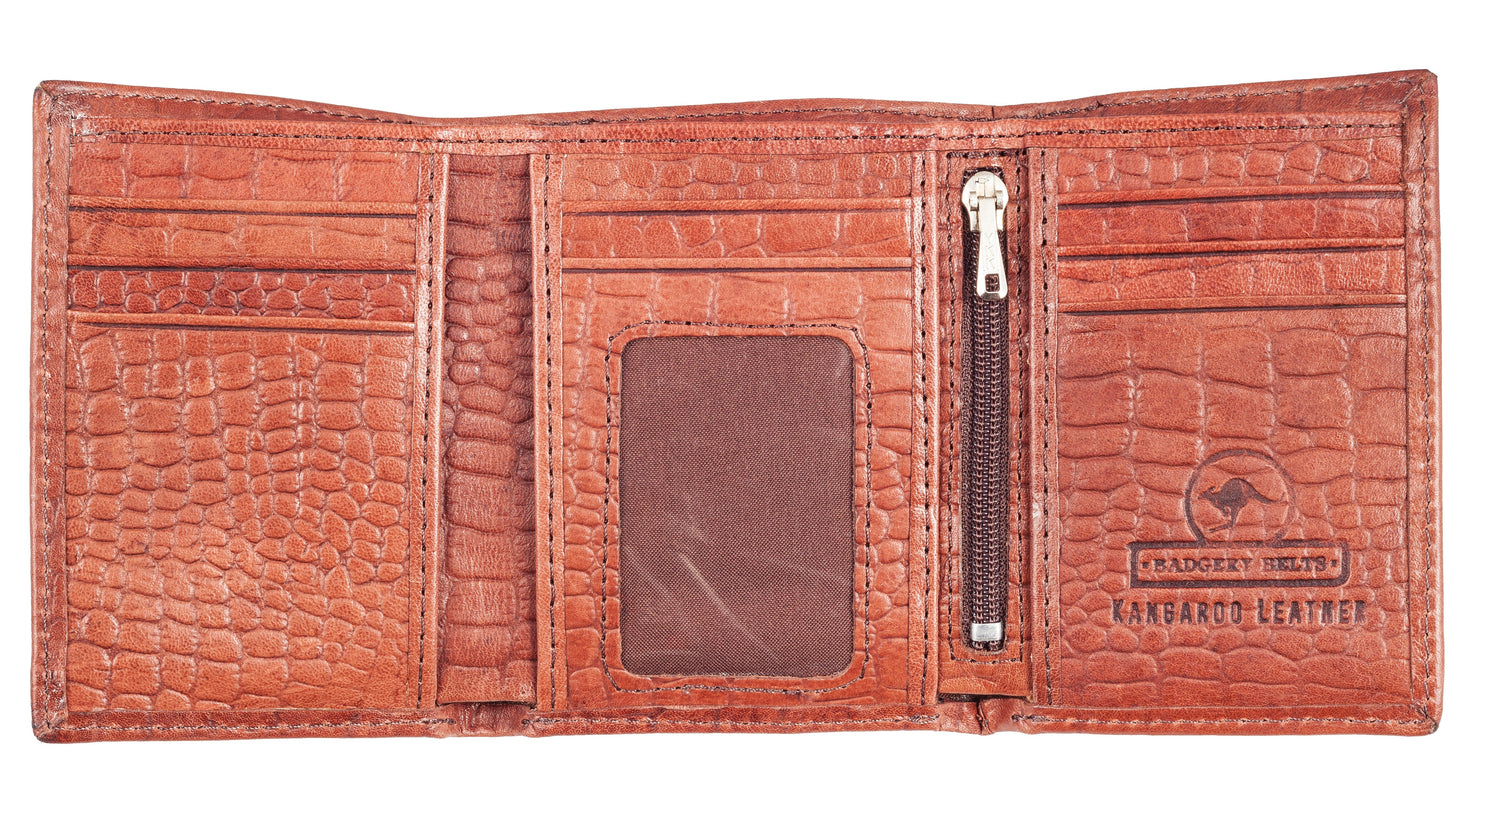 Inside of two fold Classic Leather Wallet, embossed crocodile print. Available in Single or Double Fold styles. Real deal, tough kangaroo leather, slim design for any pocket.